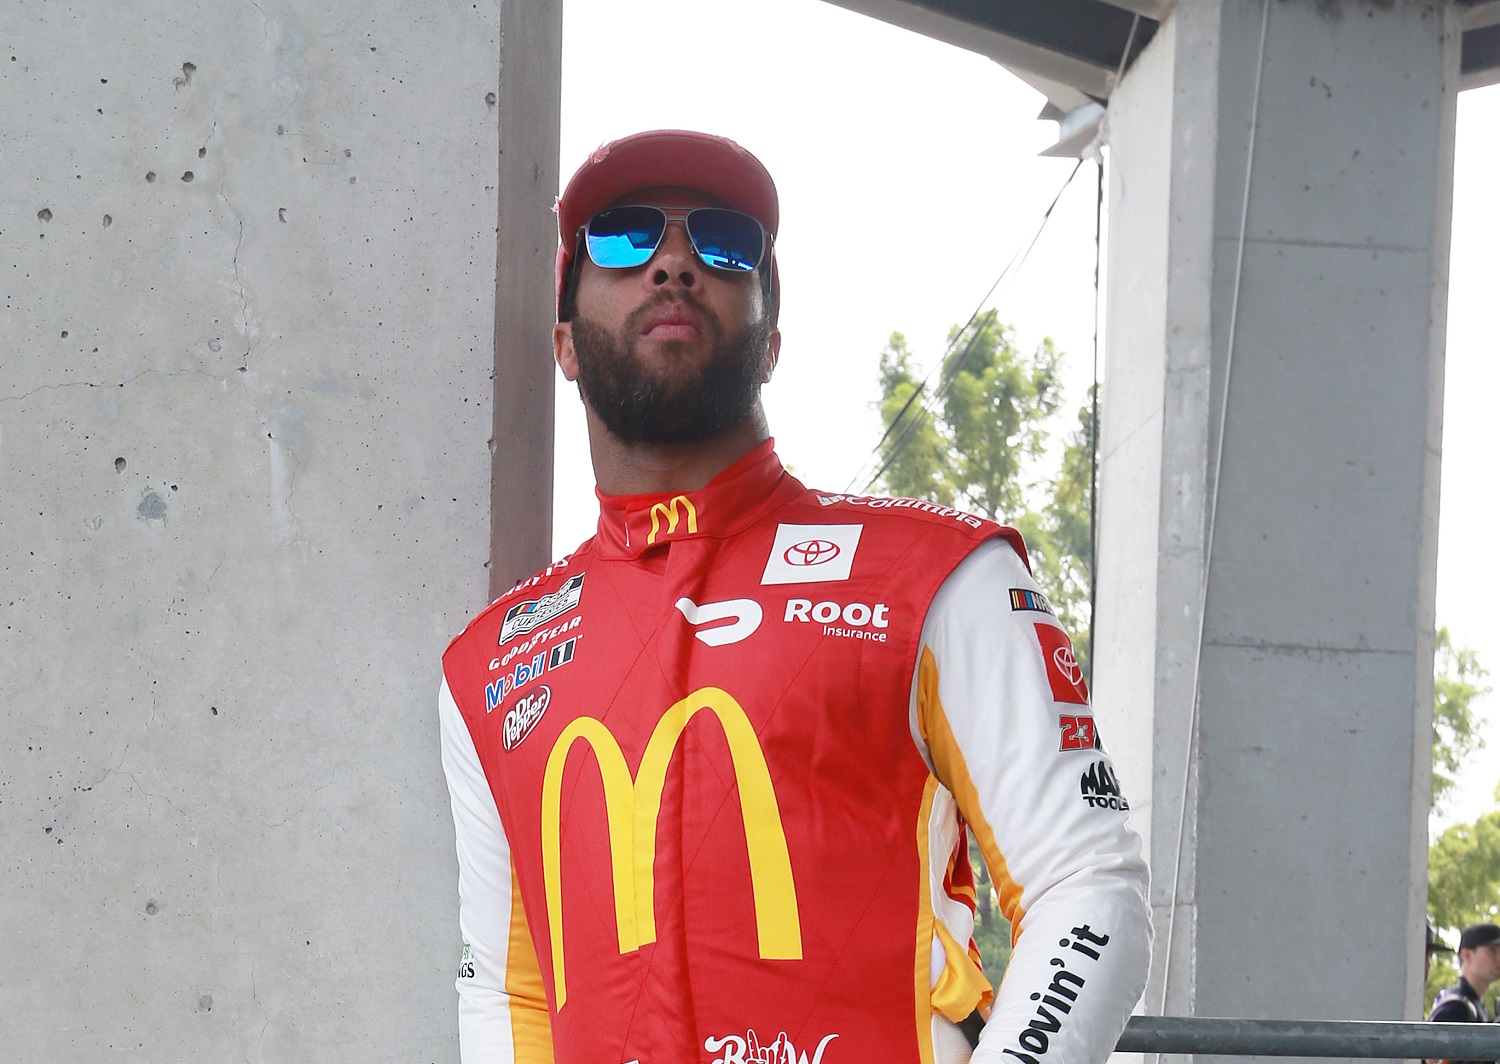 Bubba Wallace, driver of the No. 23 Toyota for 23XI Racing, waits on the grid prior to the NASCAR Cup Series Verizon 200 at Indianapolis Motor Speedway. | Sean Gardner/Getty Images